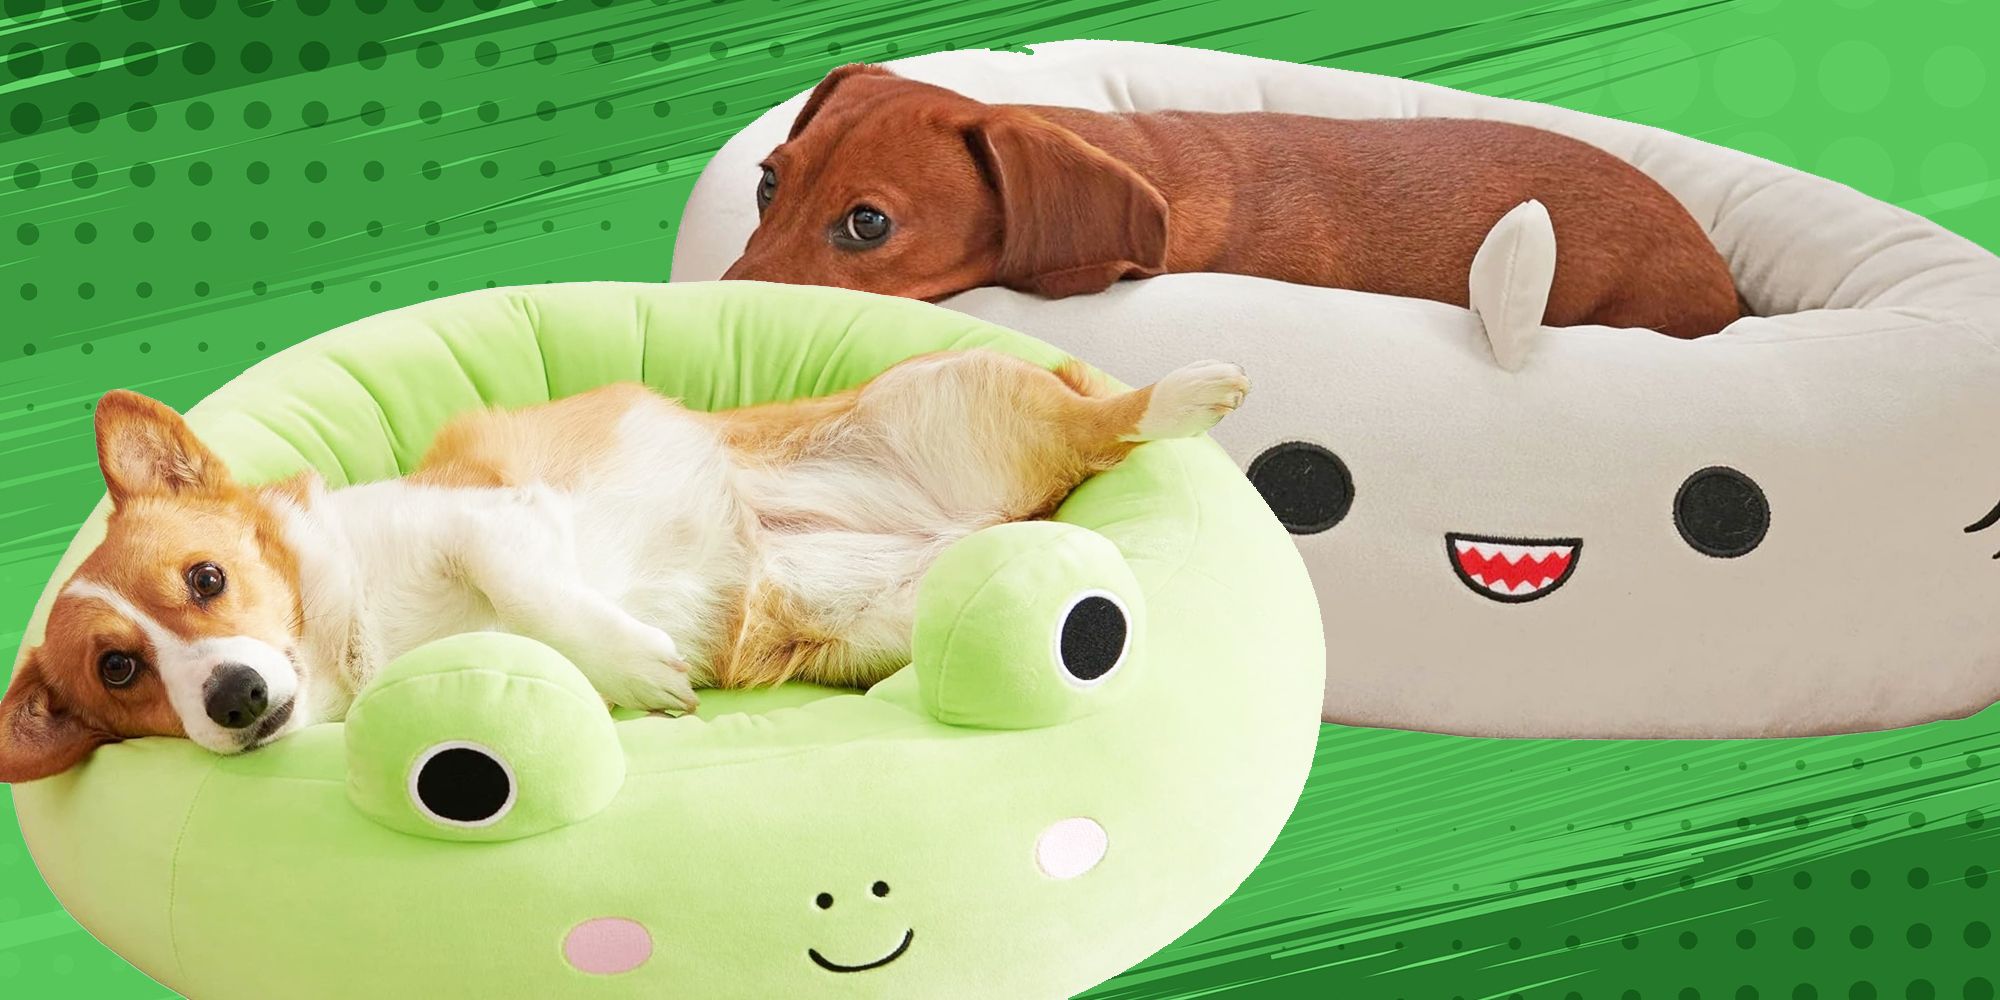 Squishmallows Wendy The Frog Pet Bed - 24 in